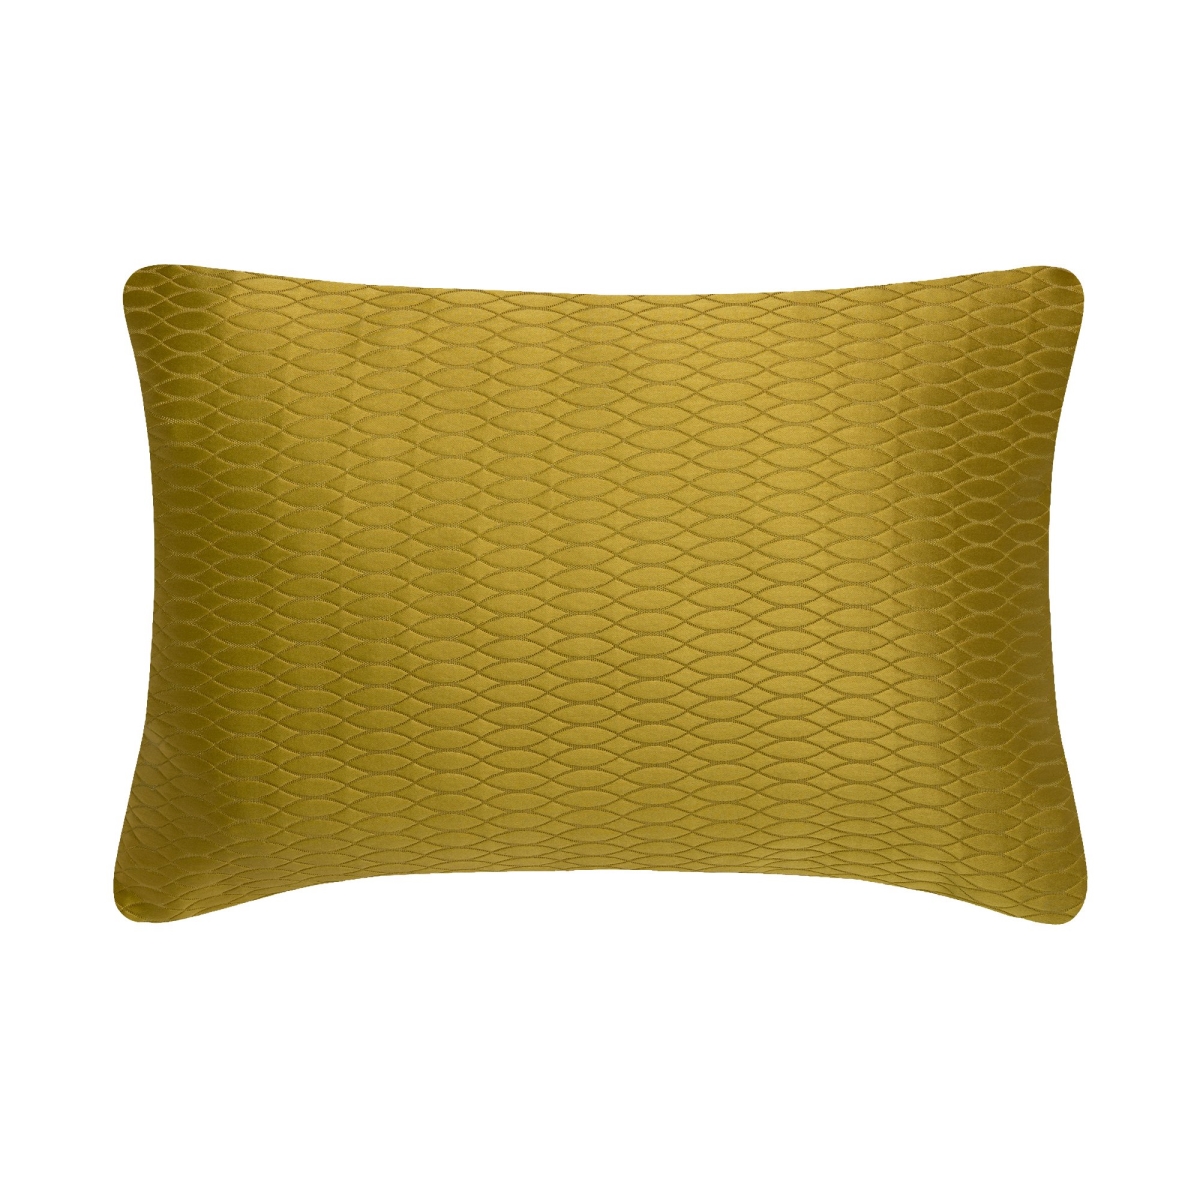 14 X 18 In. Biscay Boudoir Decorative Cushion, Gold - 100 Percent Duck Feather